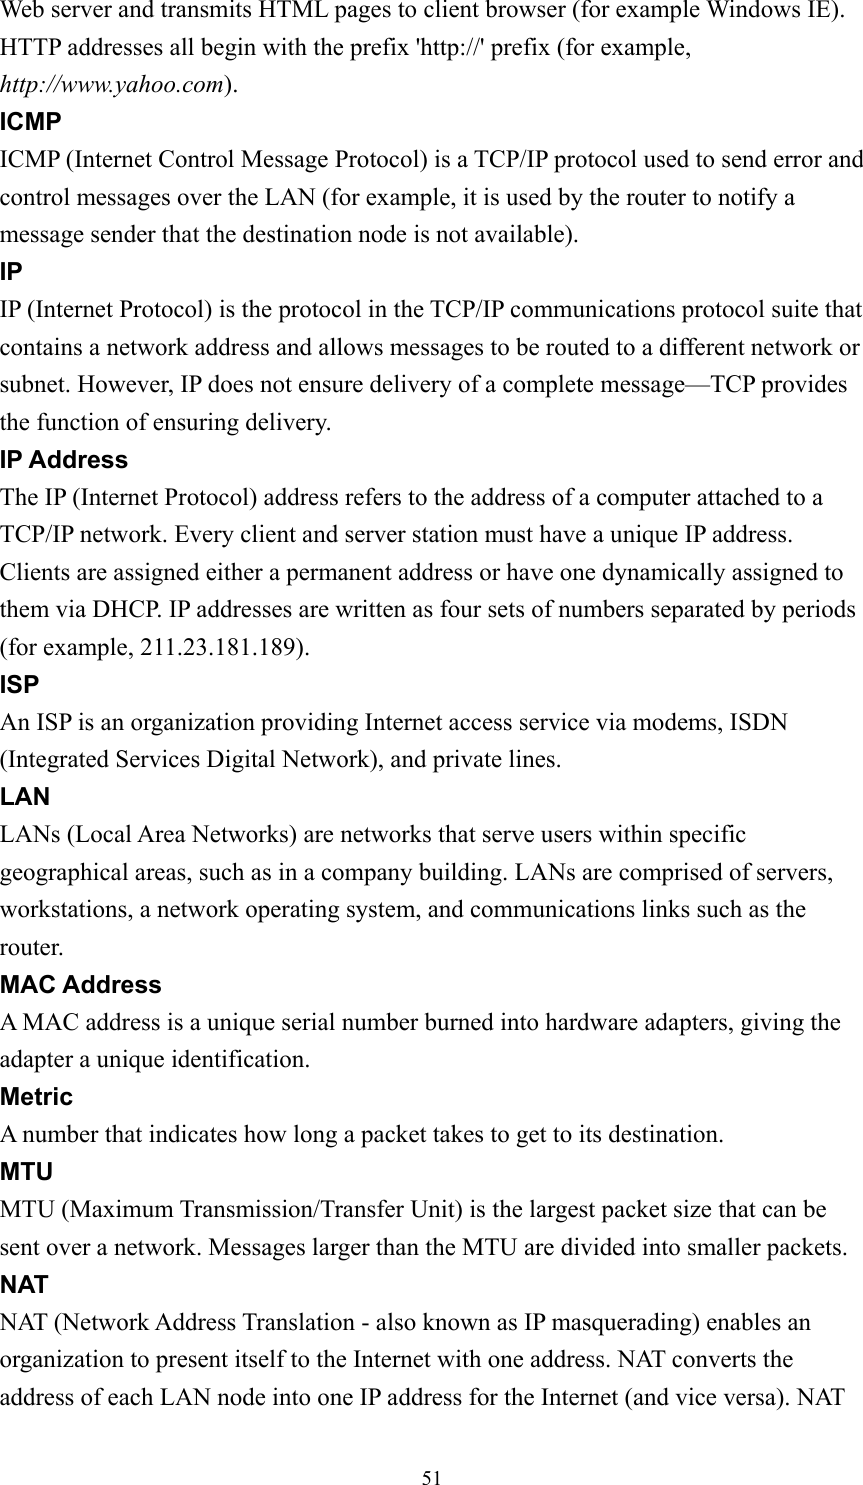 Web server and transmits HTML pages to client browser (for example Windows IE). HTTP addresses all begin with the prefix &apos;http://&apos; prefix (for example, http://www.yahoo.com). ICMP ICMP (Internet Control Message Protocol) is a TCP/IP protocol used to send error and control messages over the LAN (for example, it is used by the router to notify a message sender that the destination node is not available). IP IP (Internet Protocol) is the protocol in the TCP/IP communications protocol suite that contains a network address and allows messages to be routed to a different network or subnet. However, IP does not ensure delivery of a complete message—TCP provides the function of ensuring delivery. IP Address The IP (Internet Protocol) address refers to the address of a computer attached to a TCP/IP network. Every client and server station must have a unique IP address. Clients are assigned either a permanent address or have one dynamically assigned to them via DHCP. IP addresses are written as four sets of numbers separated by periods (for example, 211.23.181.189). ISP An ISP is an organization providing Internet access service via modems, ISDN (Integrated Services Digital Network), and private lines. LAN LANs (Local Area Networks) are networks that serve users within specific geographical areas, such as in a company building. LANs are comprised of servers, workstations, a network operating system, and communications links such as the router. MAC Address A MAC address is a unique serial number burned into hardware adapters, giving the adapter a unique identification. Metric A number that indicates how long a packet takes to get to its destination. MTU MTU (Maximum Transmission/Transfer Unit) is the largest packet size that can be sent over a network. Messages larger than the MTU are divided into smaller packets. NAT NAT (Network Address Translation - also known as IP masquerading) enables an organization to present itself to the Internet with one address. NAT converts the address of each LAN node into one IP address for the Internet (and vice versa). NAT  51